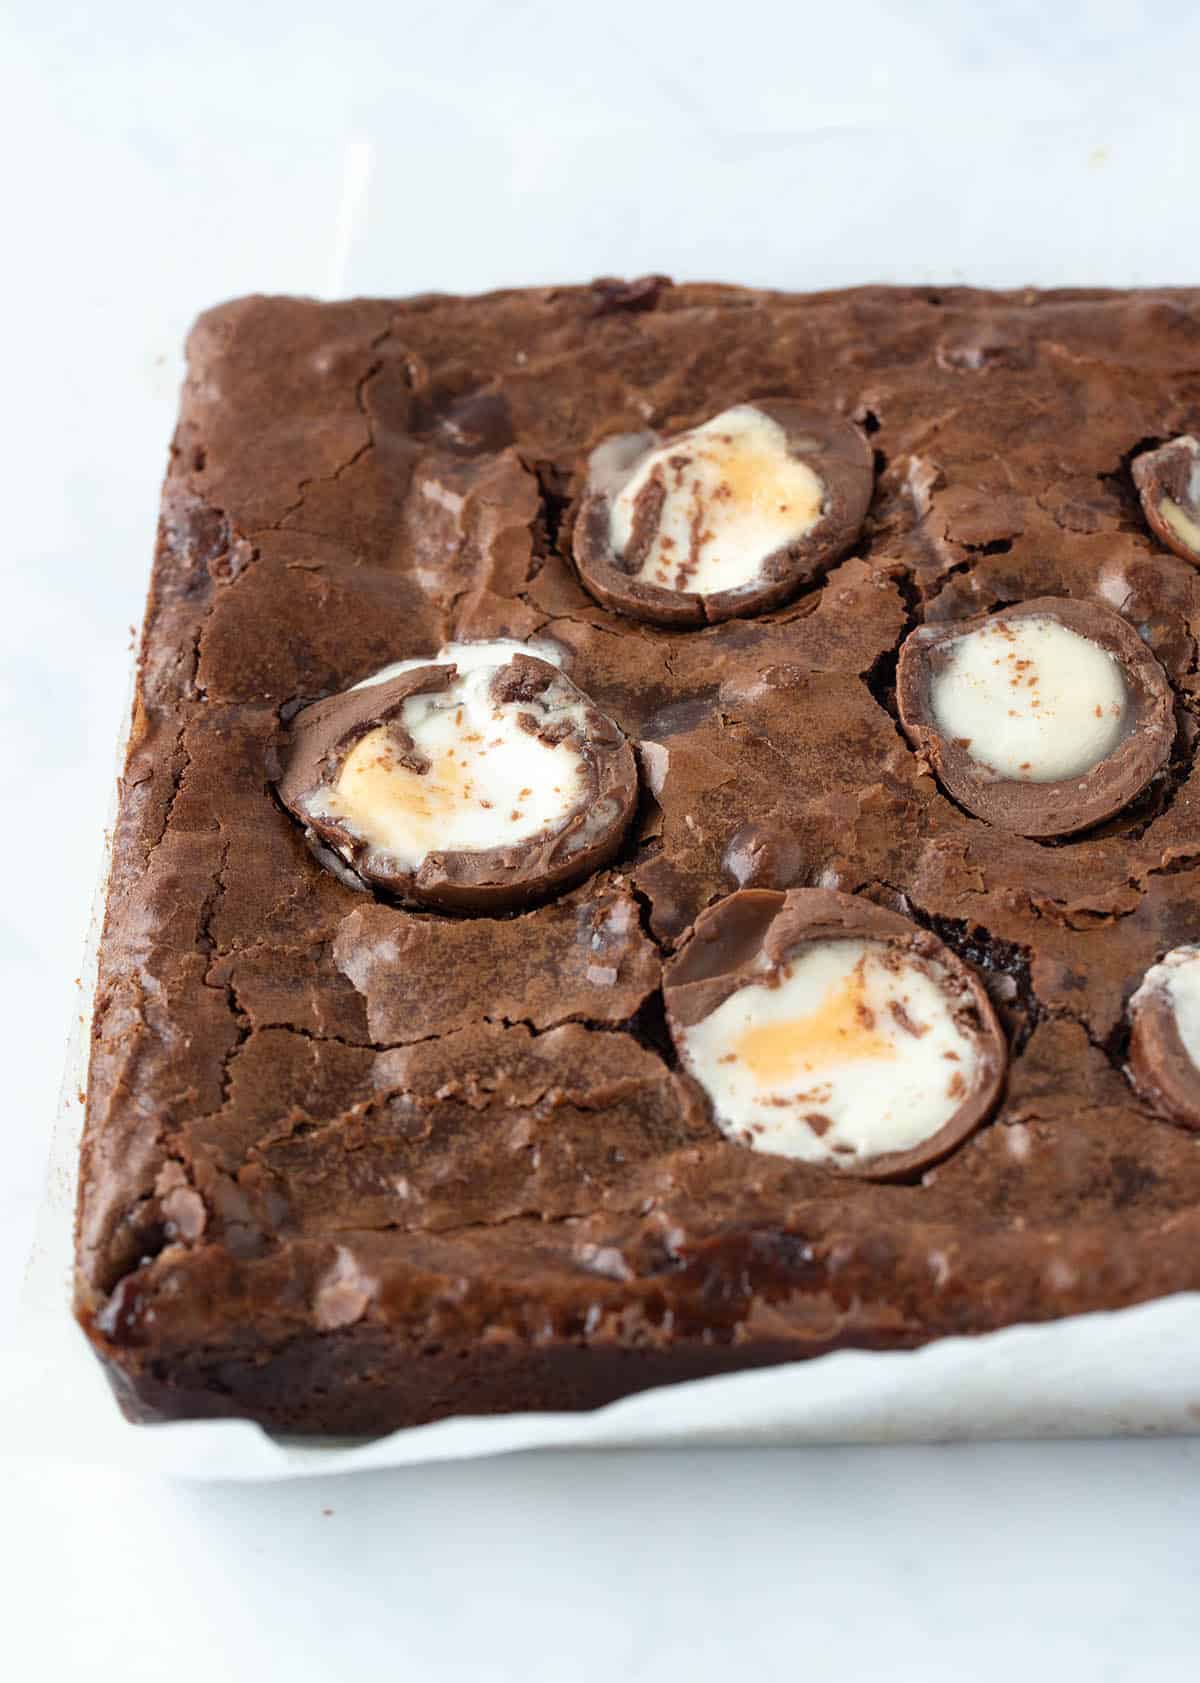 A chocolate brownie topped with Cadbury Creme Eggs.